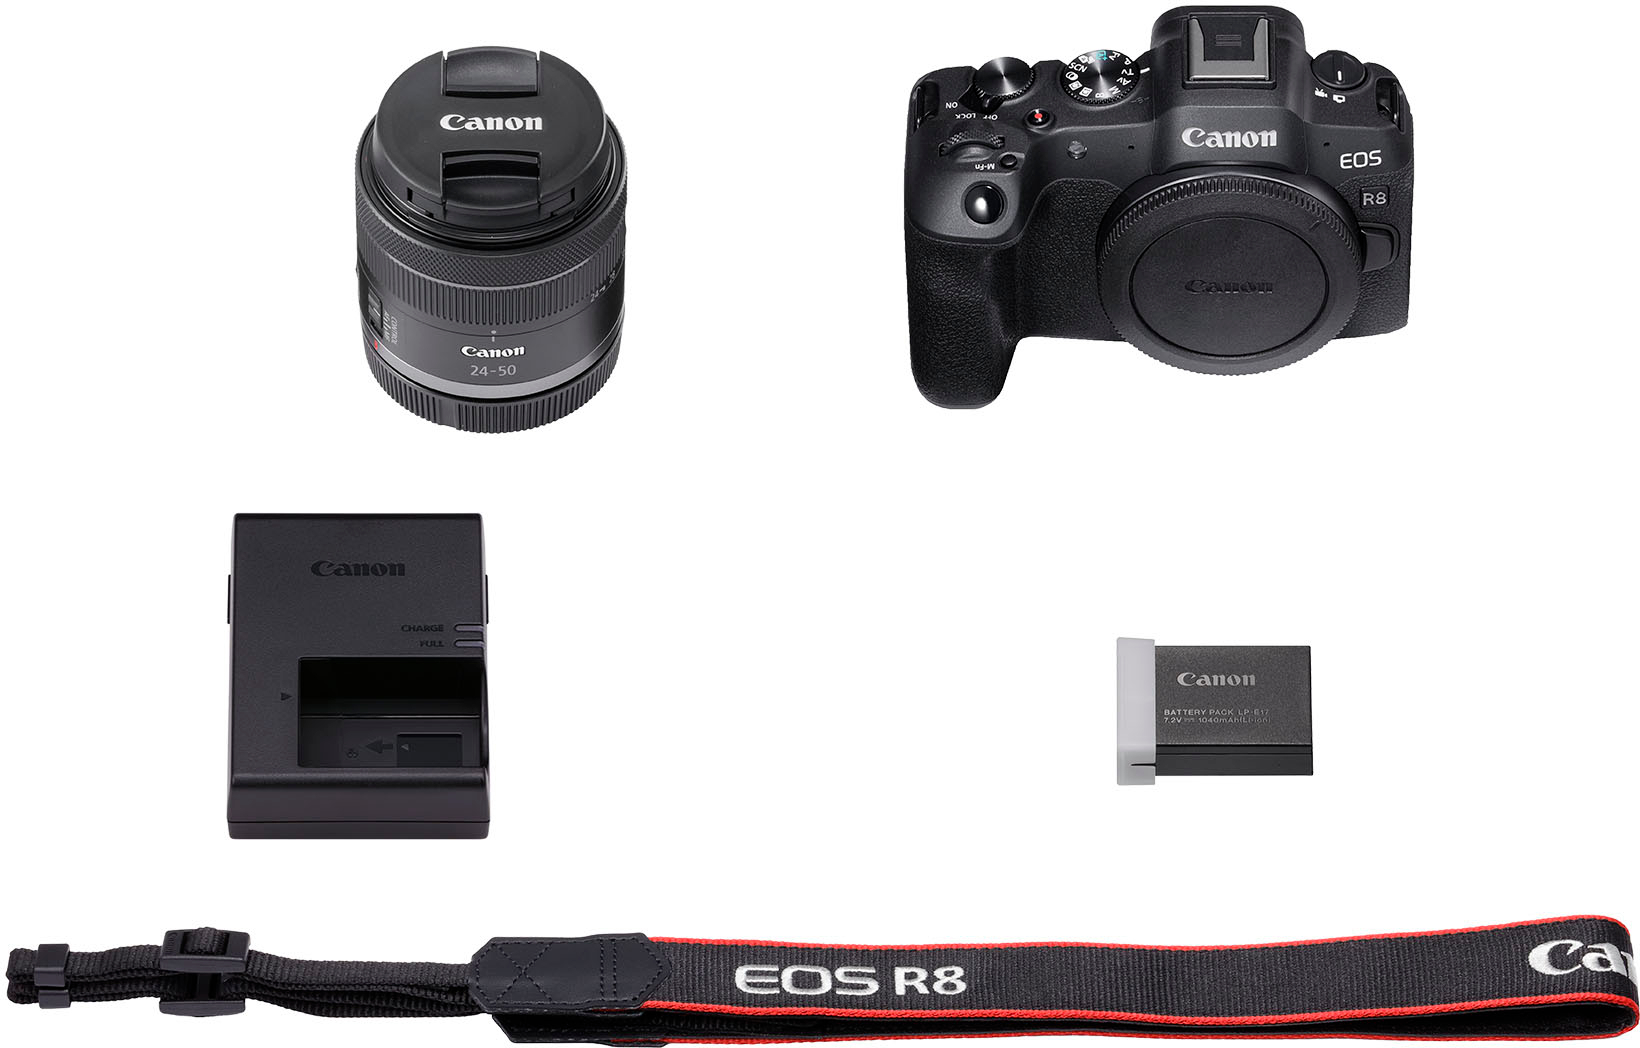 8+ Reasons to Consider the EOS R8 for Content Creation